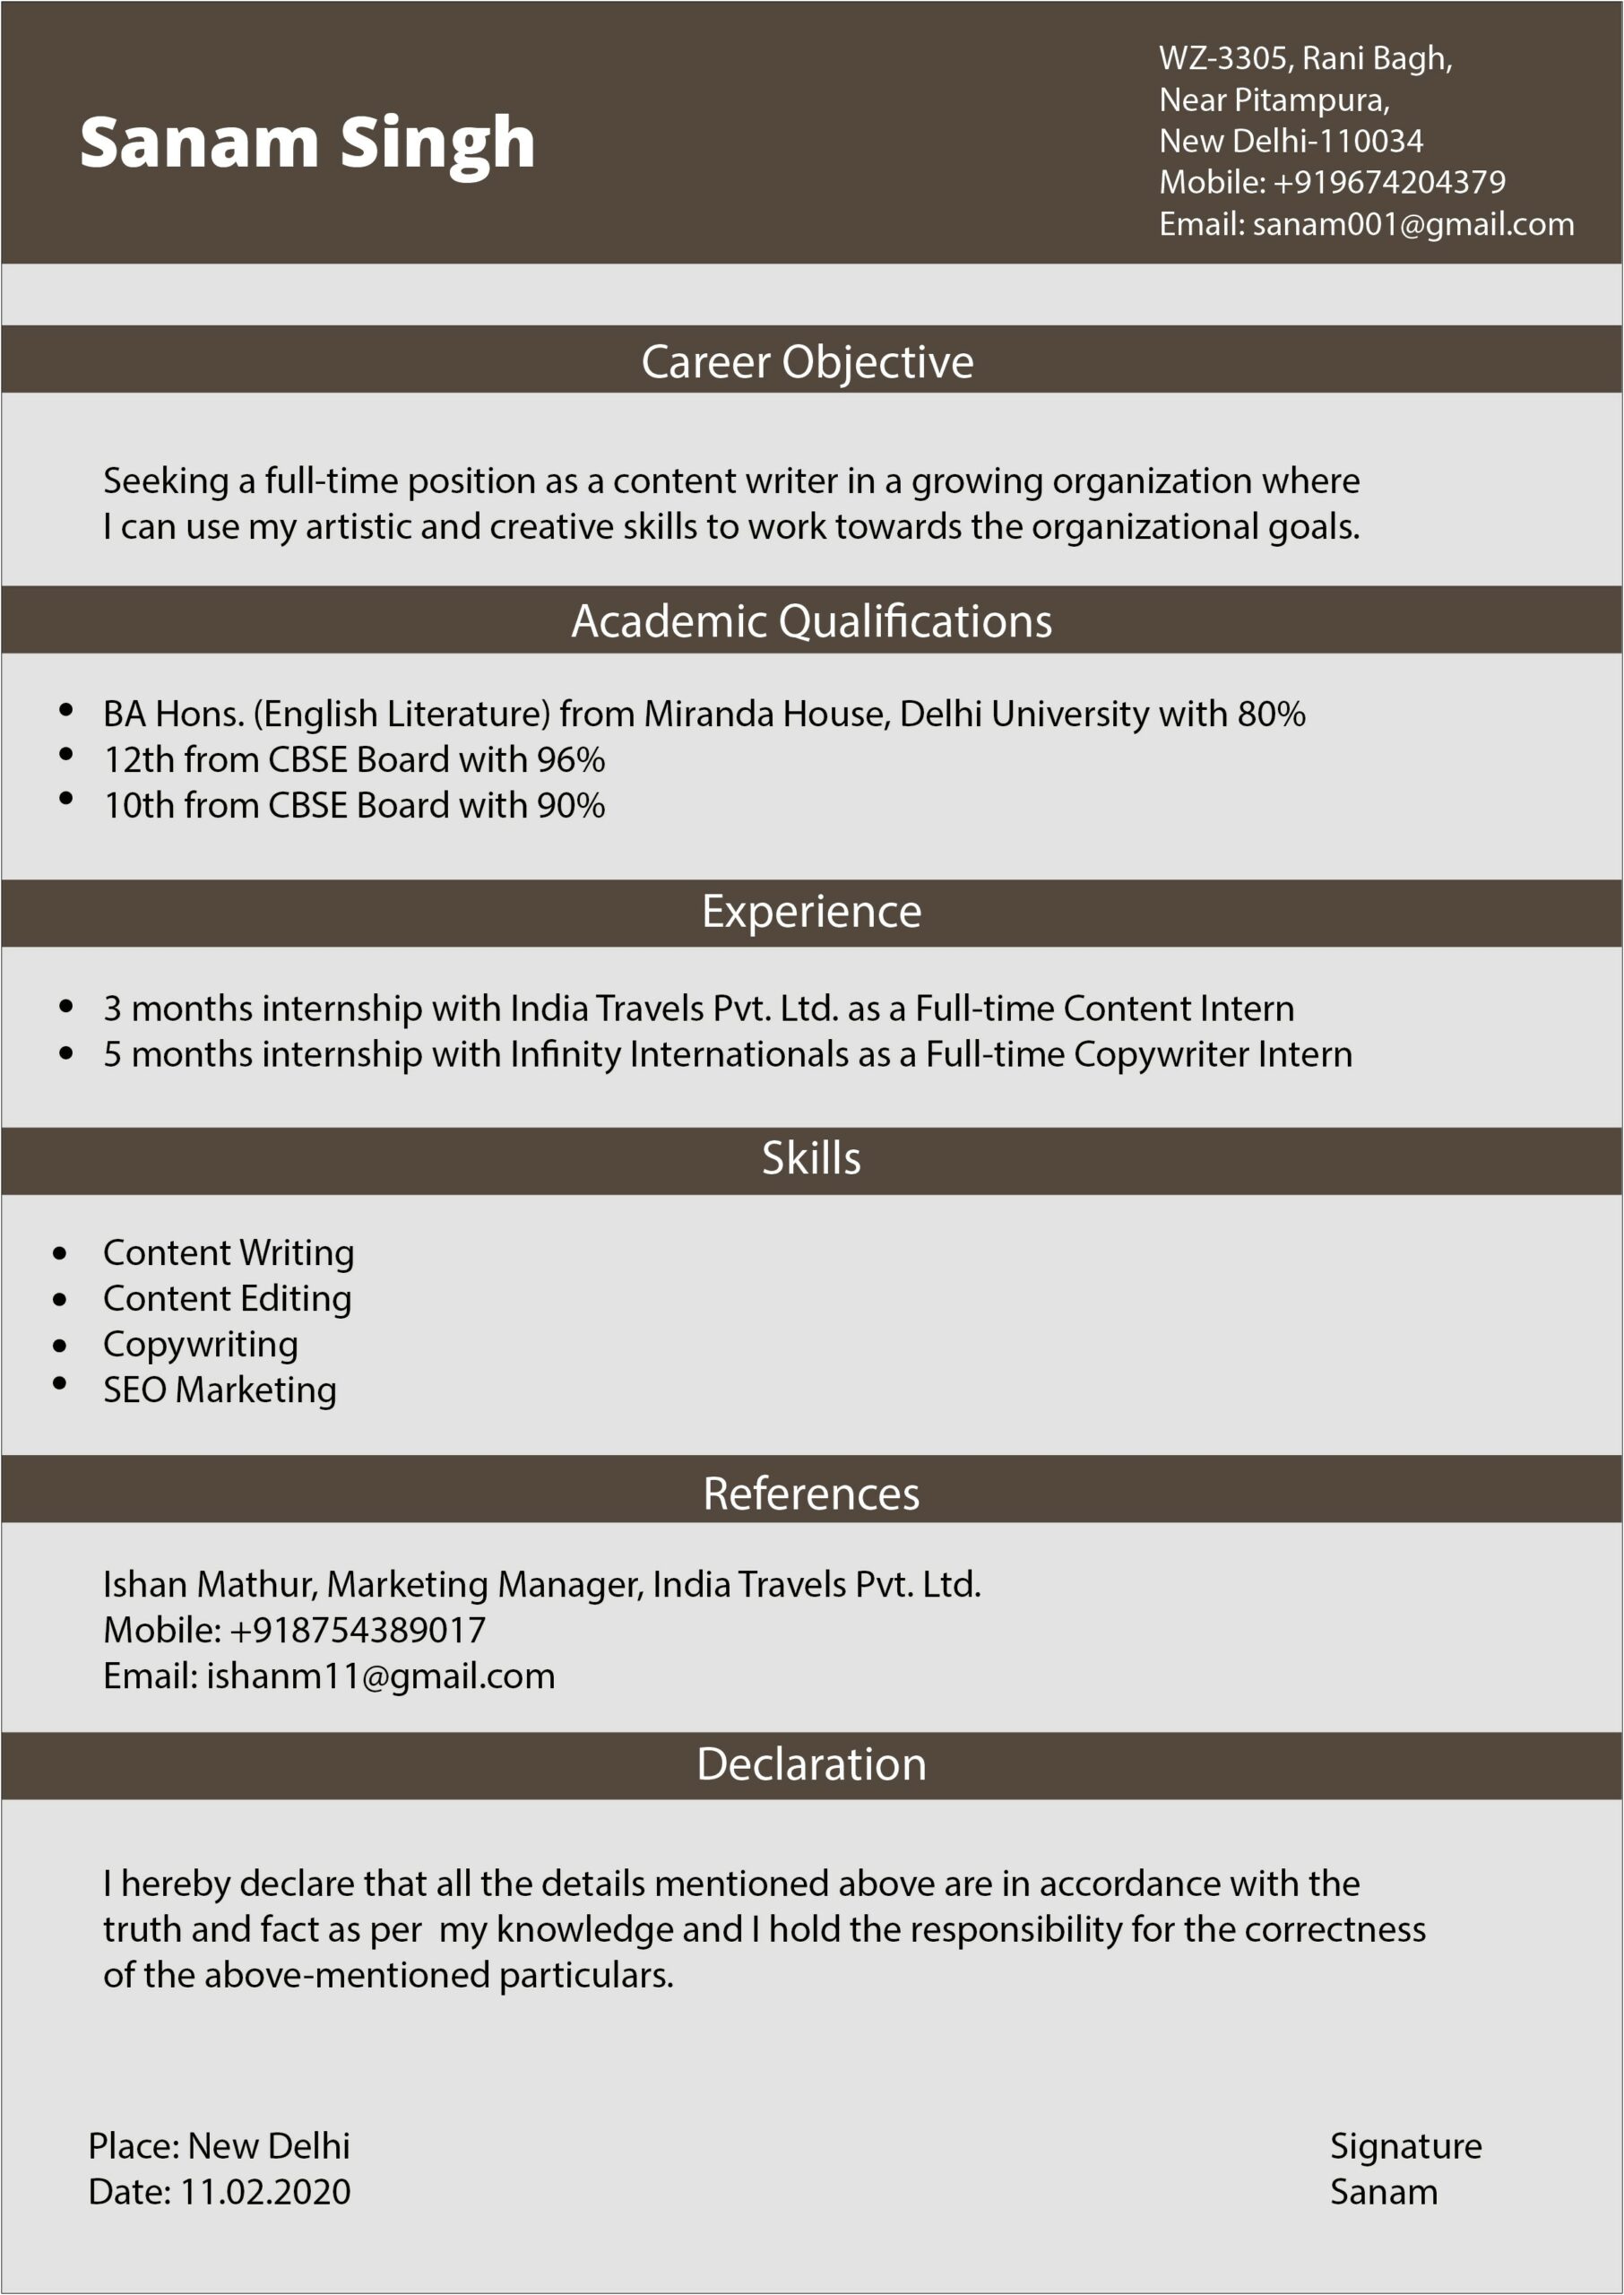 Resume Template With Qualifictions Statemnt And Picture